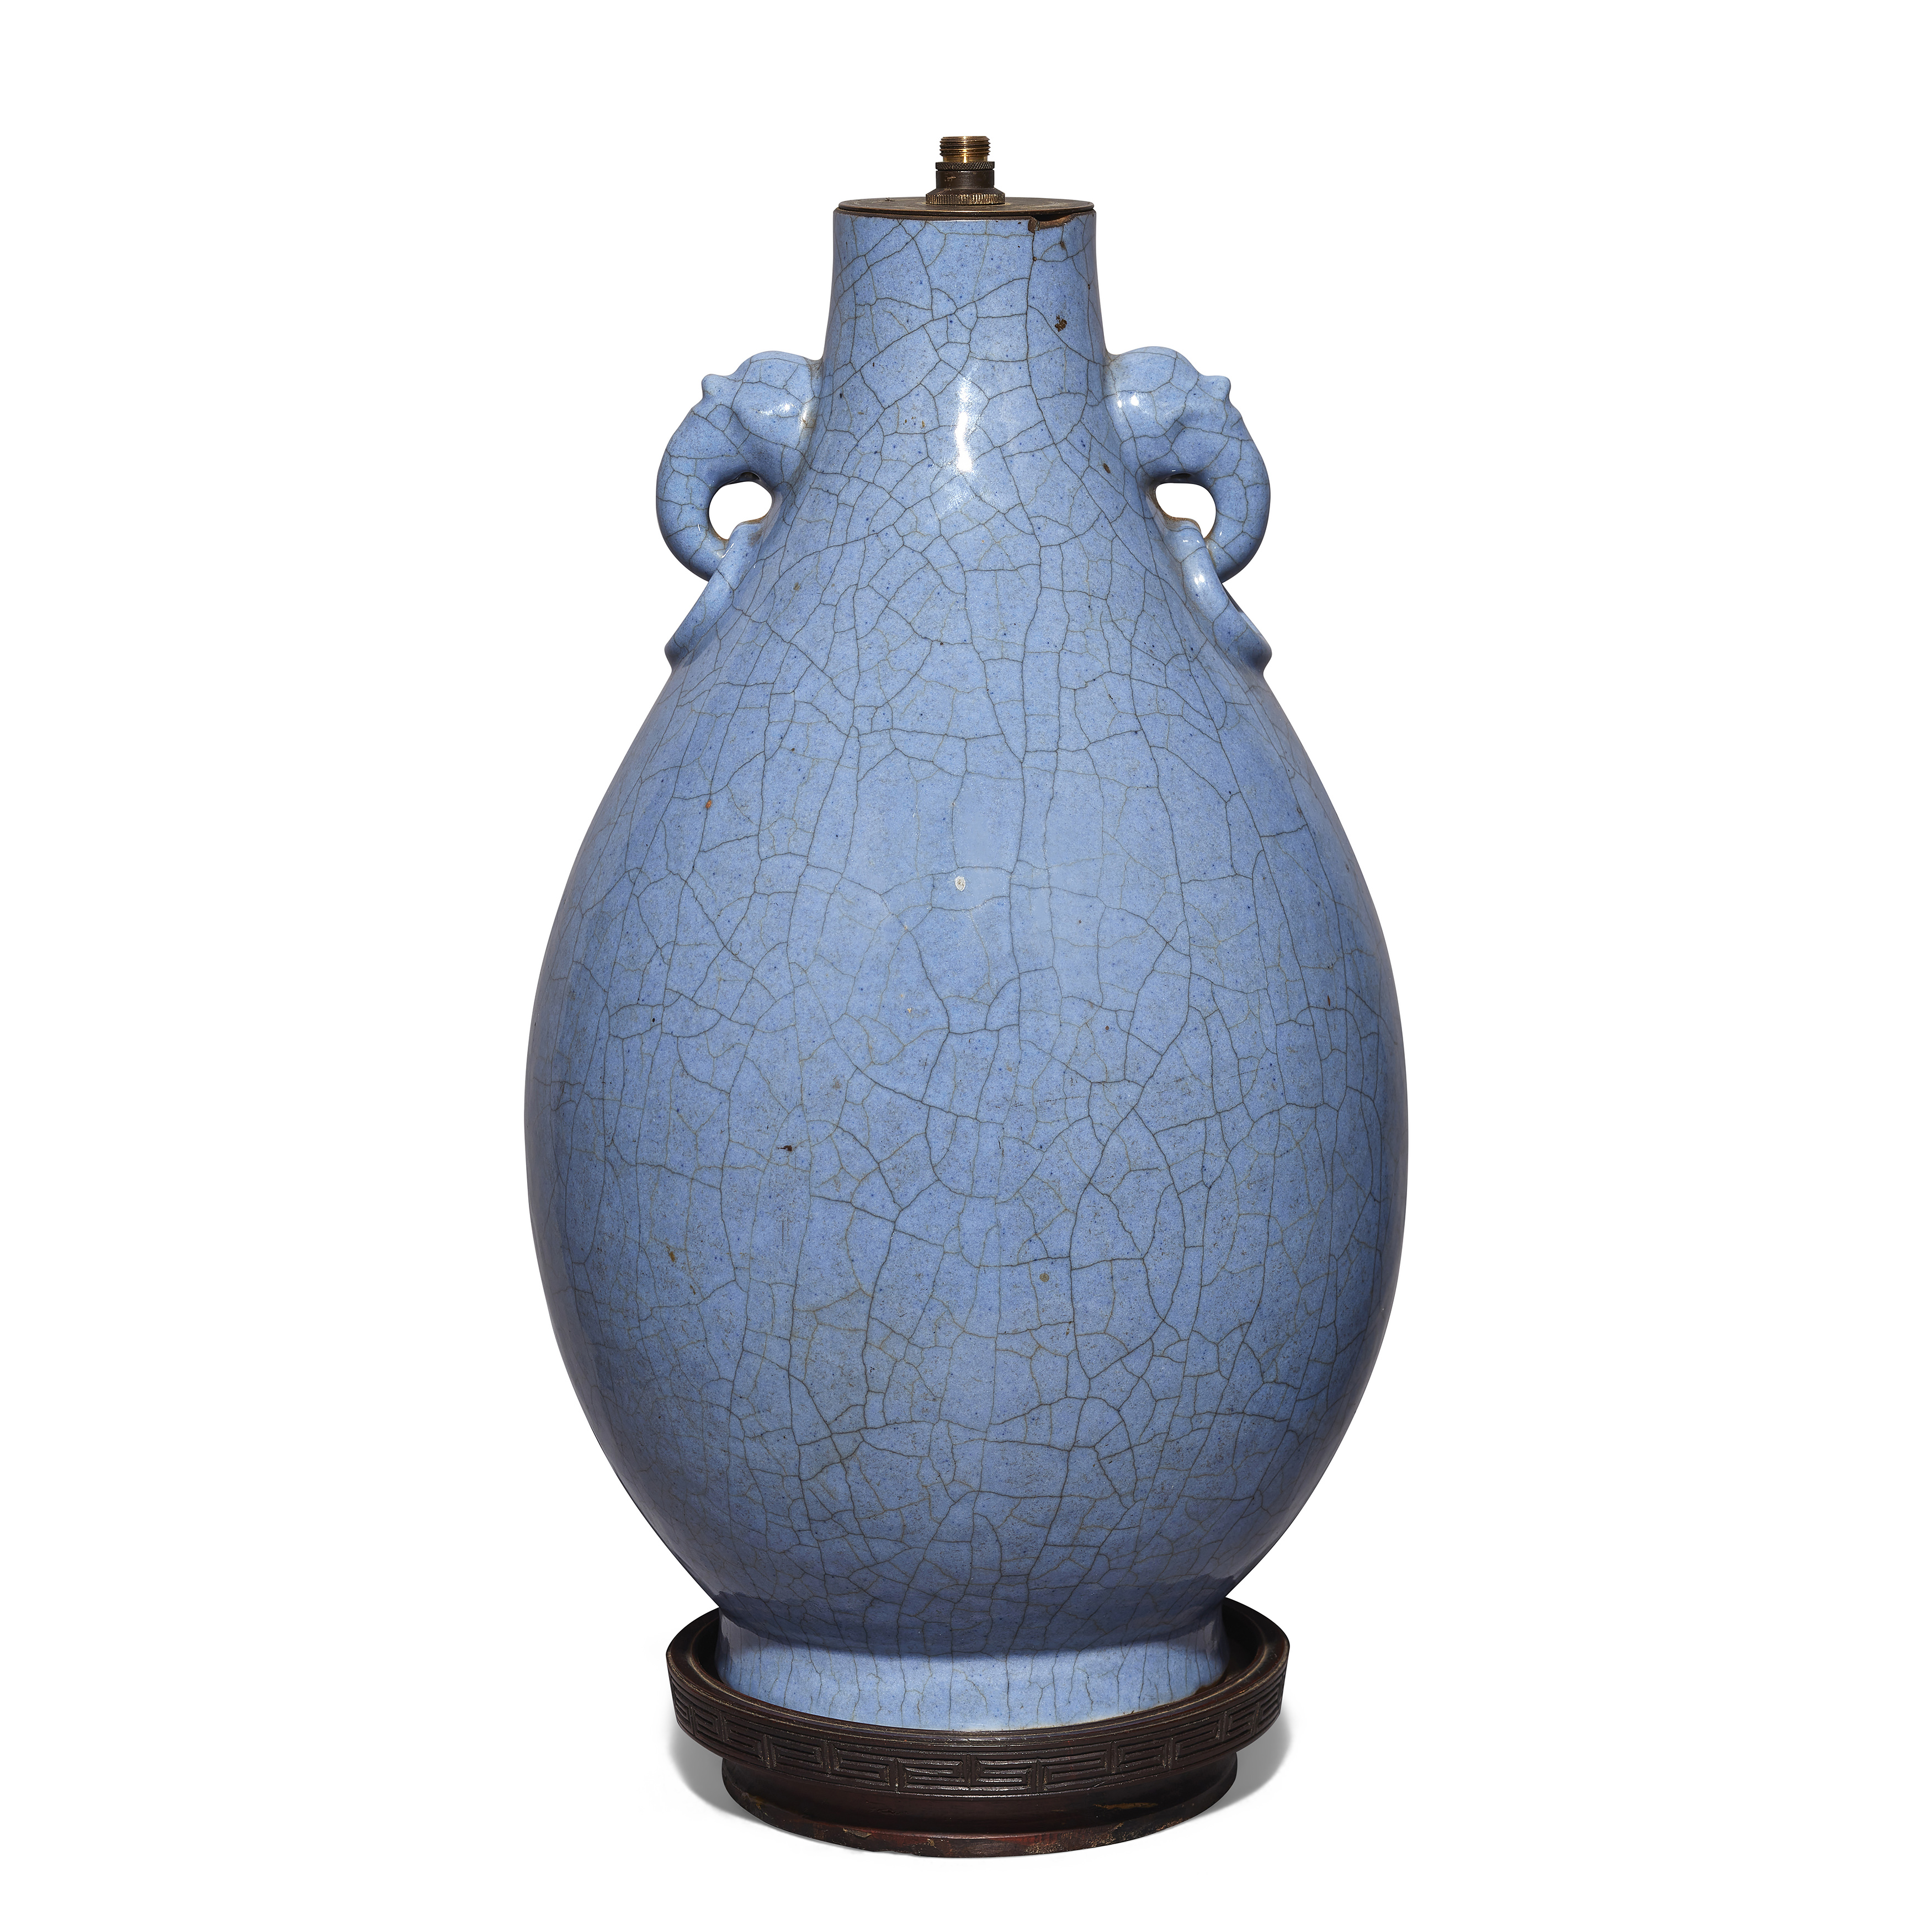 A Chinese crackle-blue glazed pear-shaped vase mounted as a lamp, Late Qing dynasty / Republic pe...